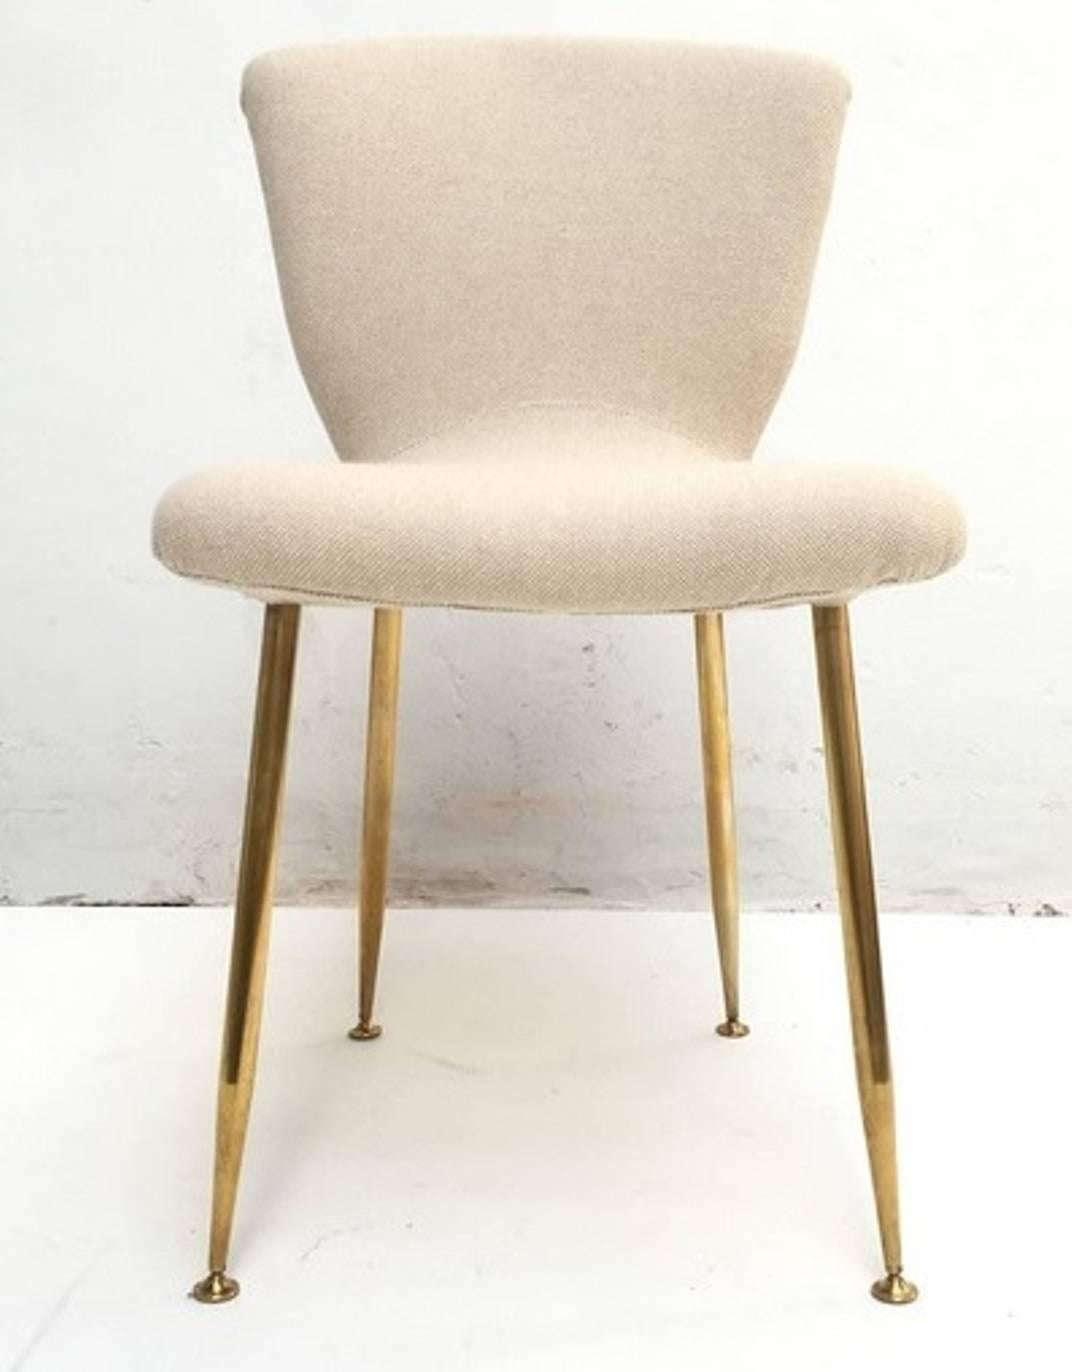 Dining Chair by Louis Sognot for Arflex, 1959, Brass Legs, Upholstery Restored